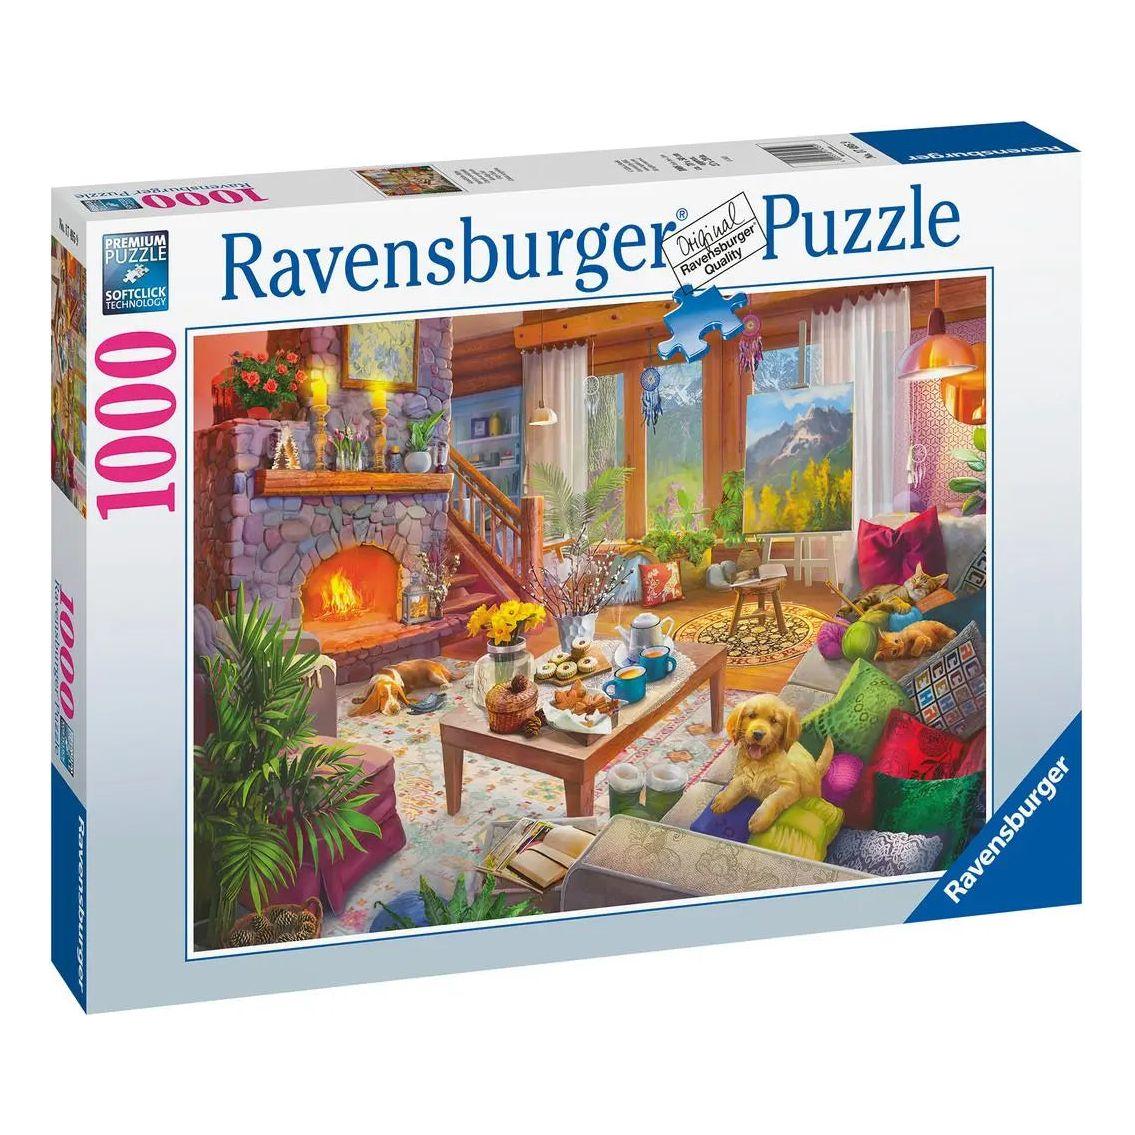 Ravensburger - Tranquil Harbour - 500 Piece Jigsaw Puzzle - The